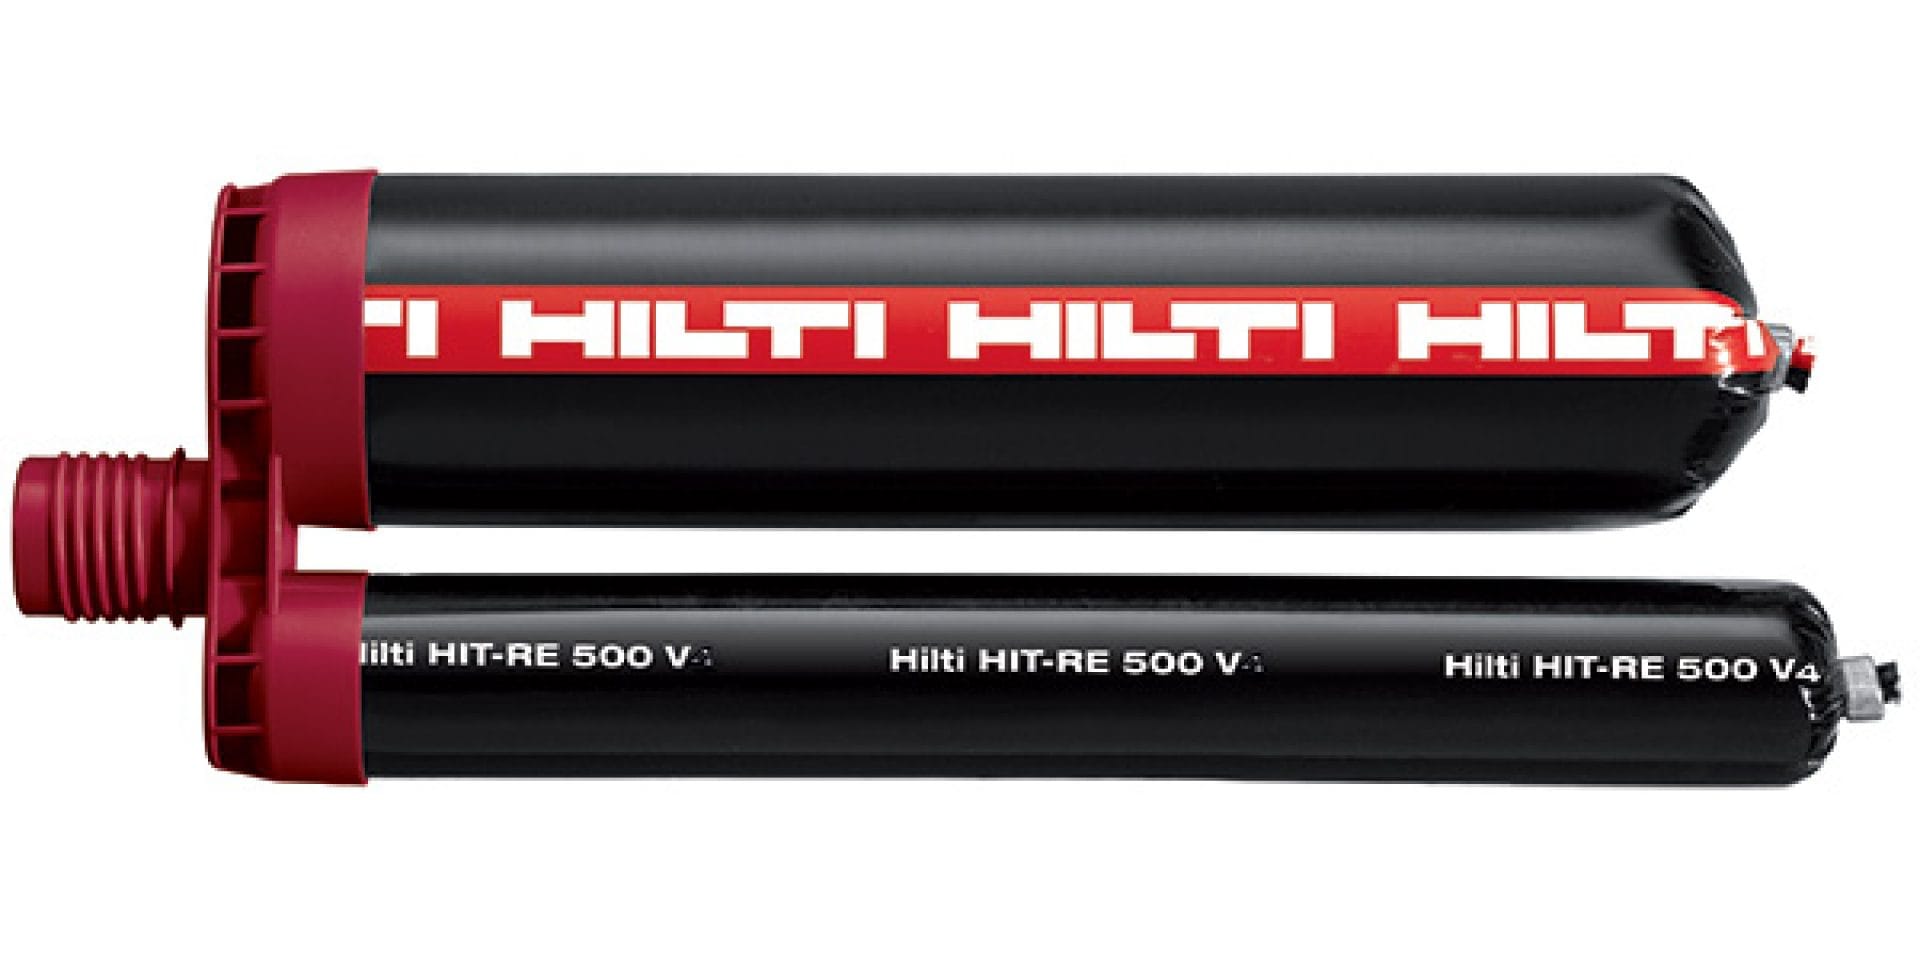 HIT-RE 500 V4 ultimate-performance injectable epoxy mortar as part of the Hilti SafeSet system